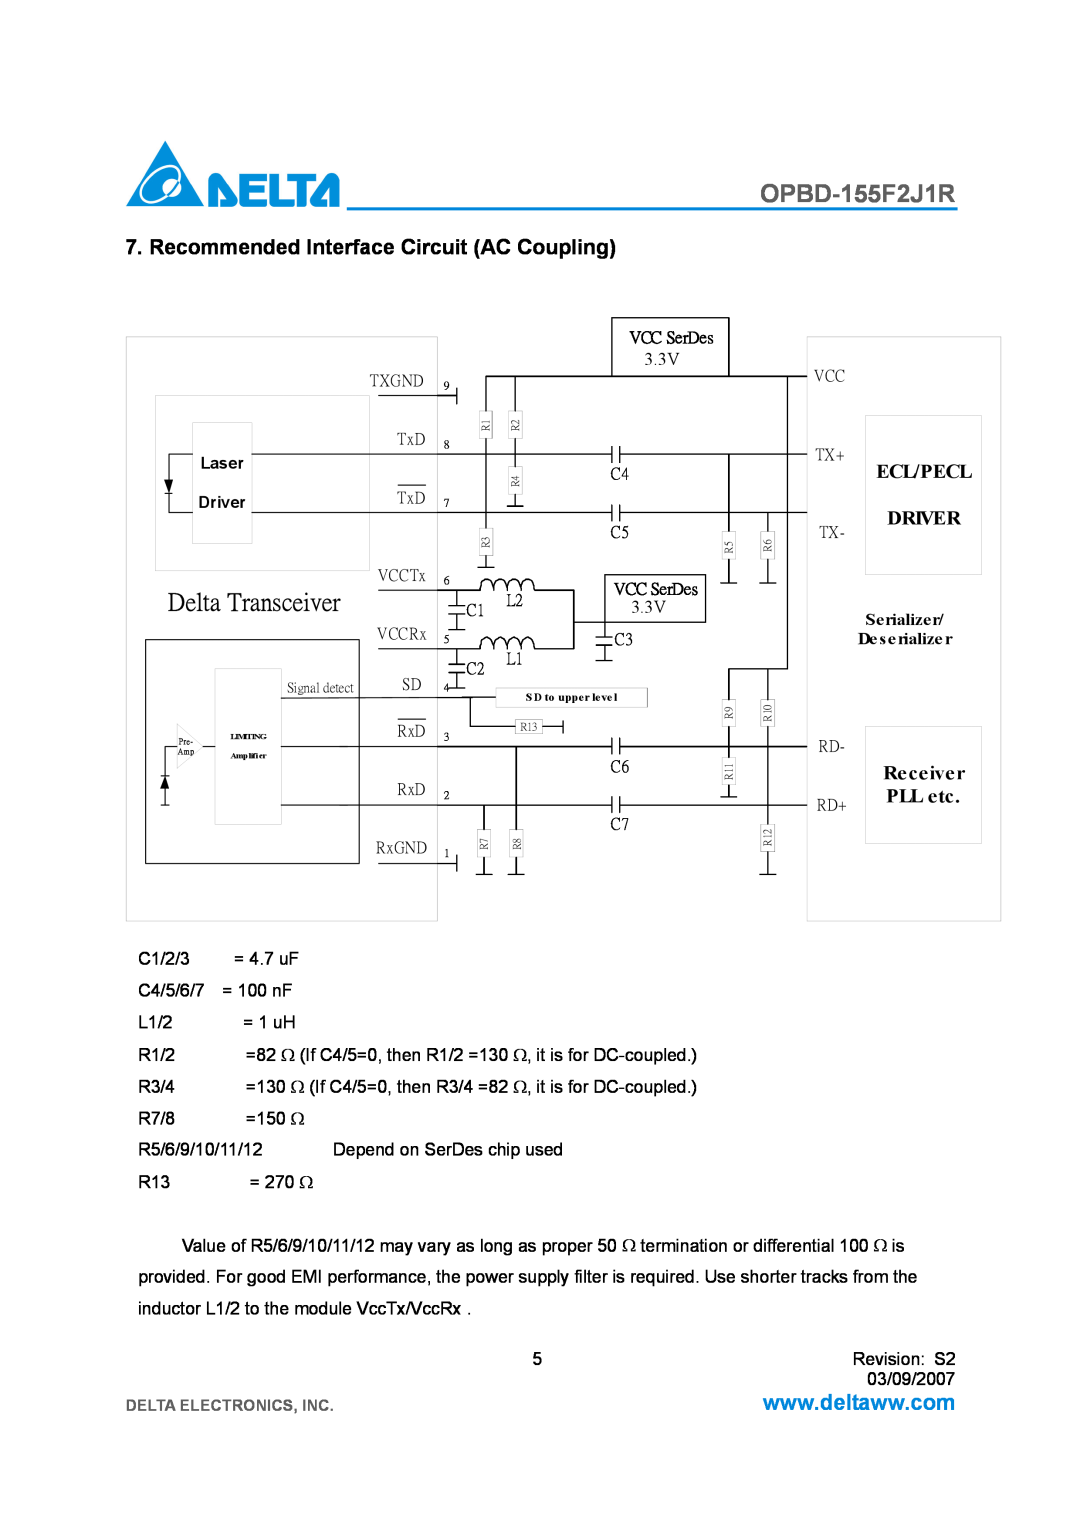 Delta Electronics OPBD-155F2J1R Recommended Interface Circuit AC Coupling, Delta Transceiver, Ecl/Pecl, Driver, Receiver 